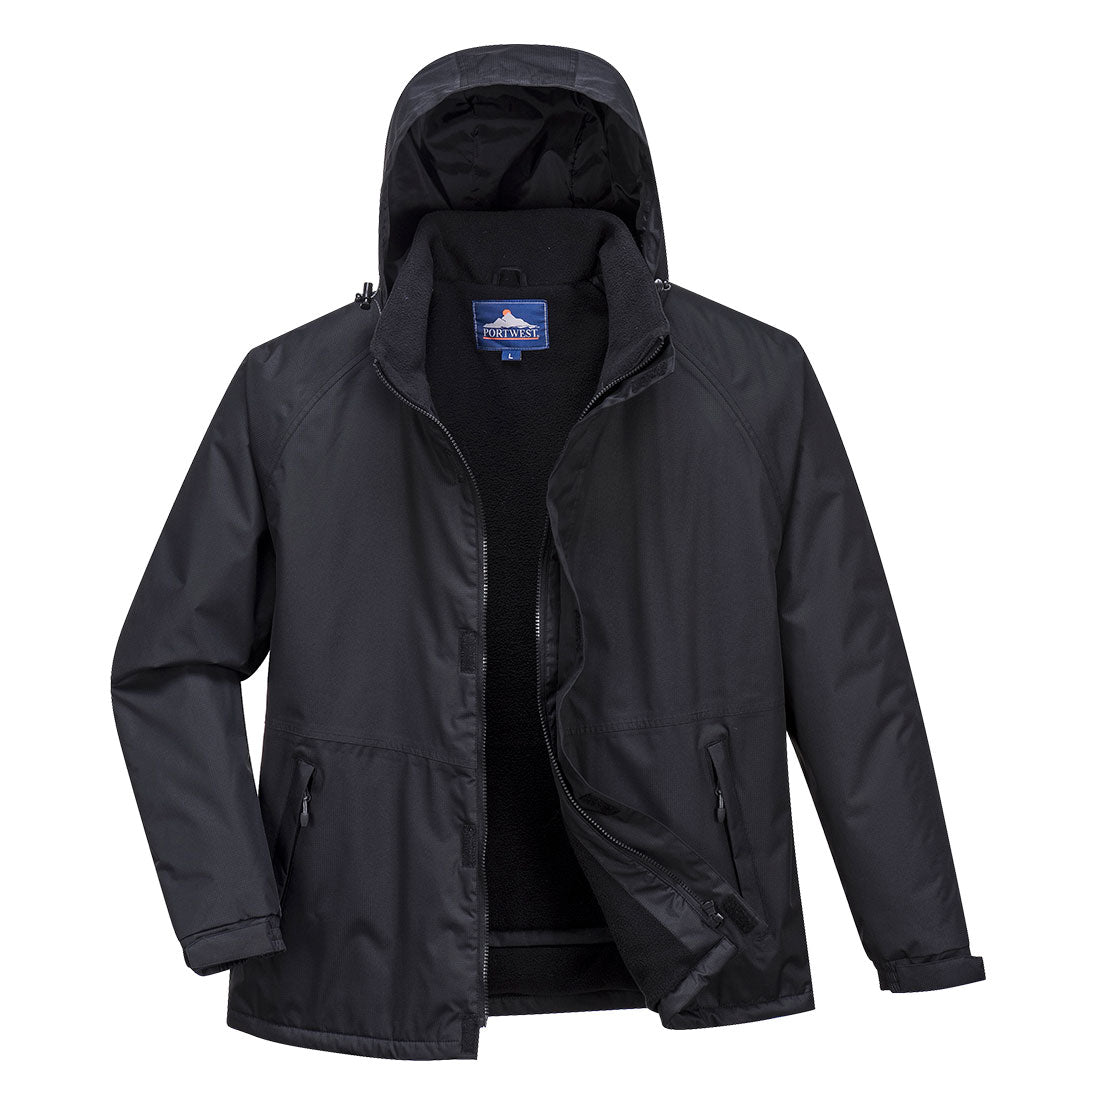 Limax Winter Jacket  (S505)